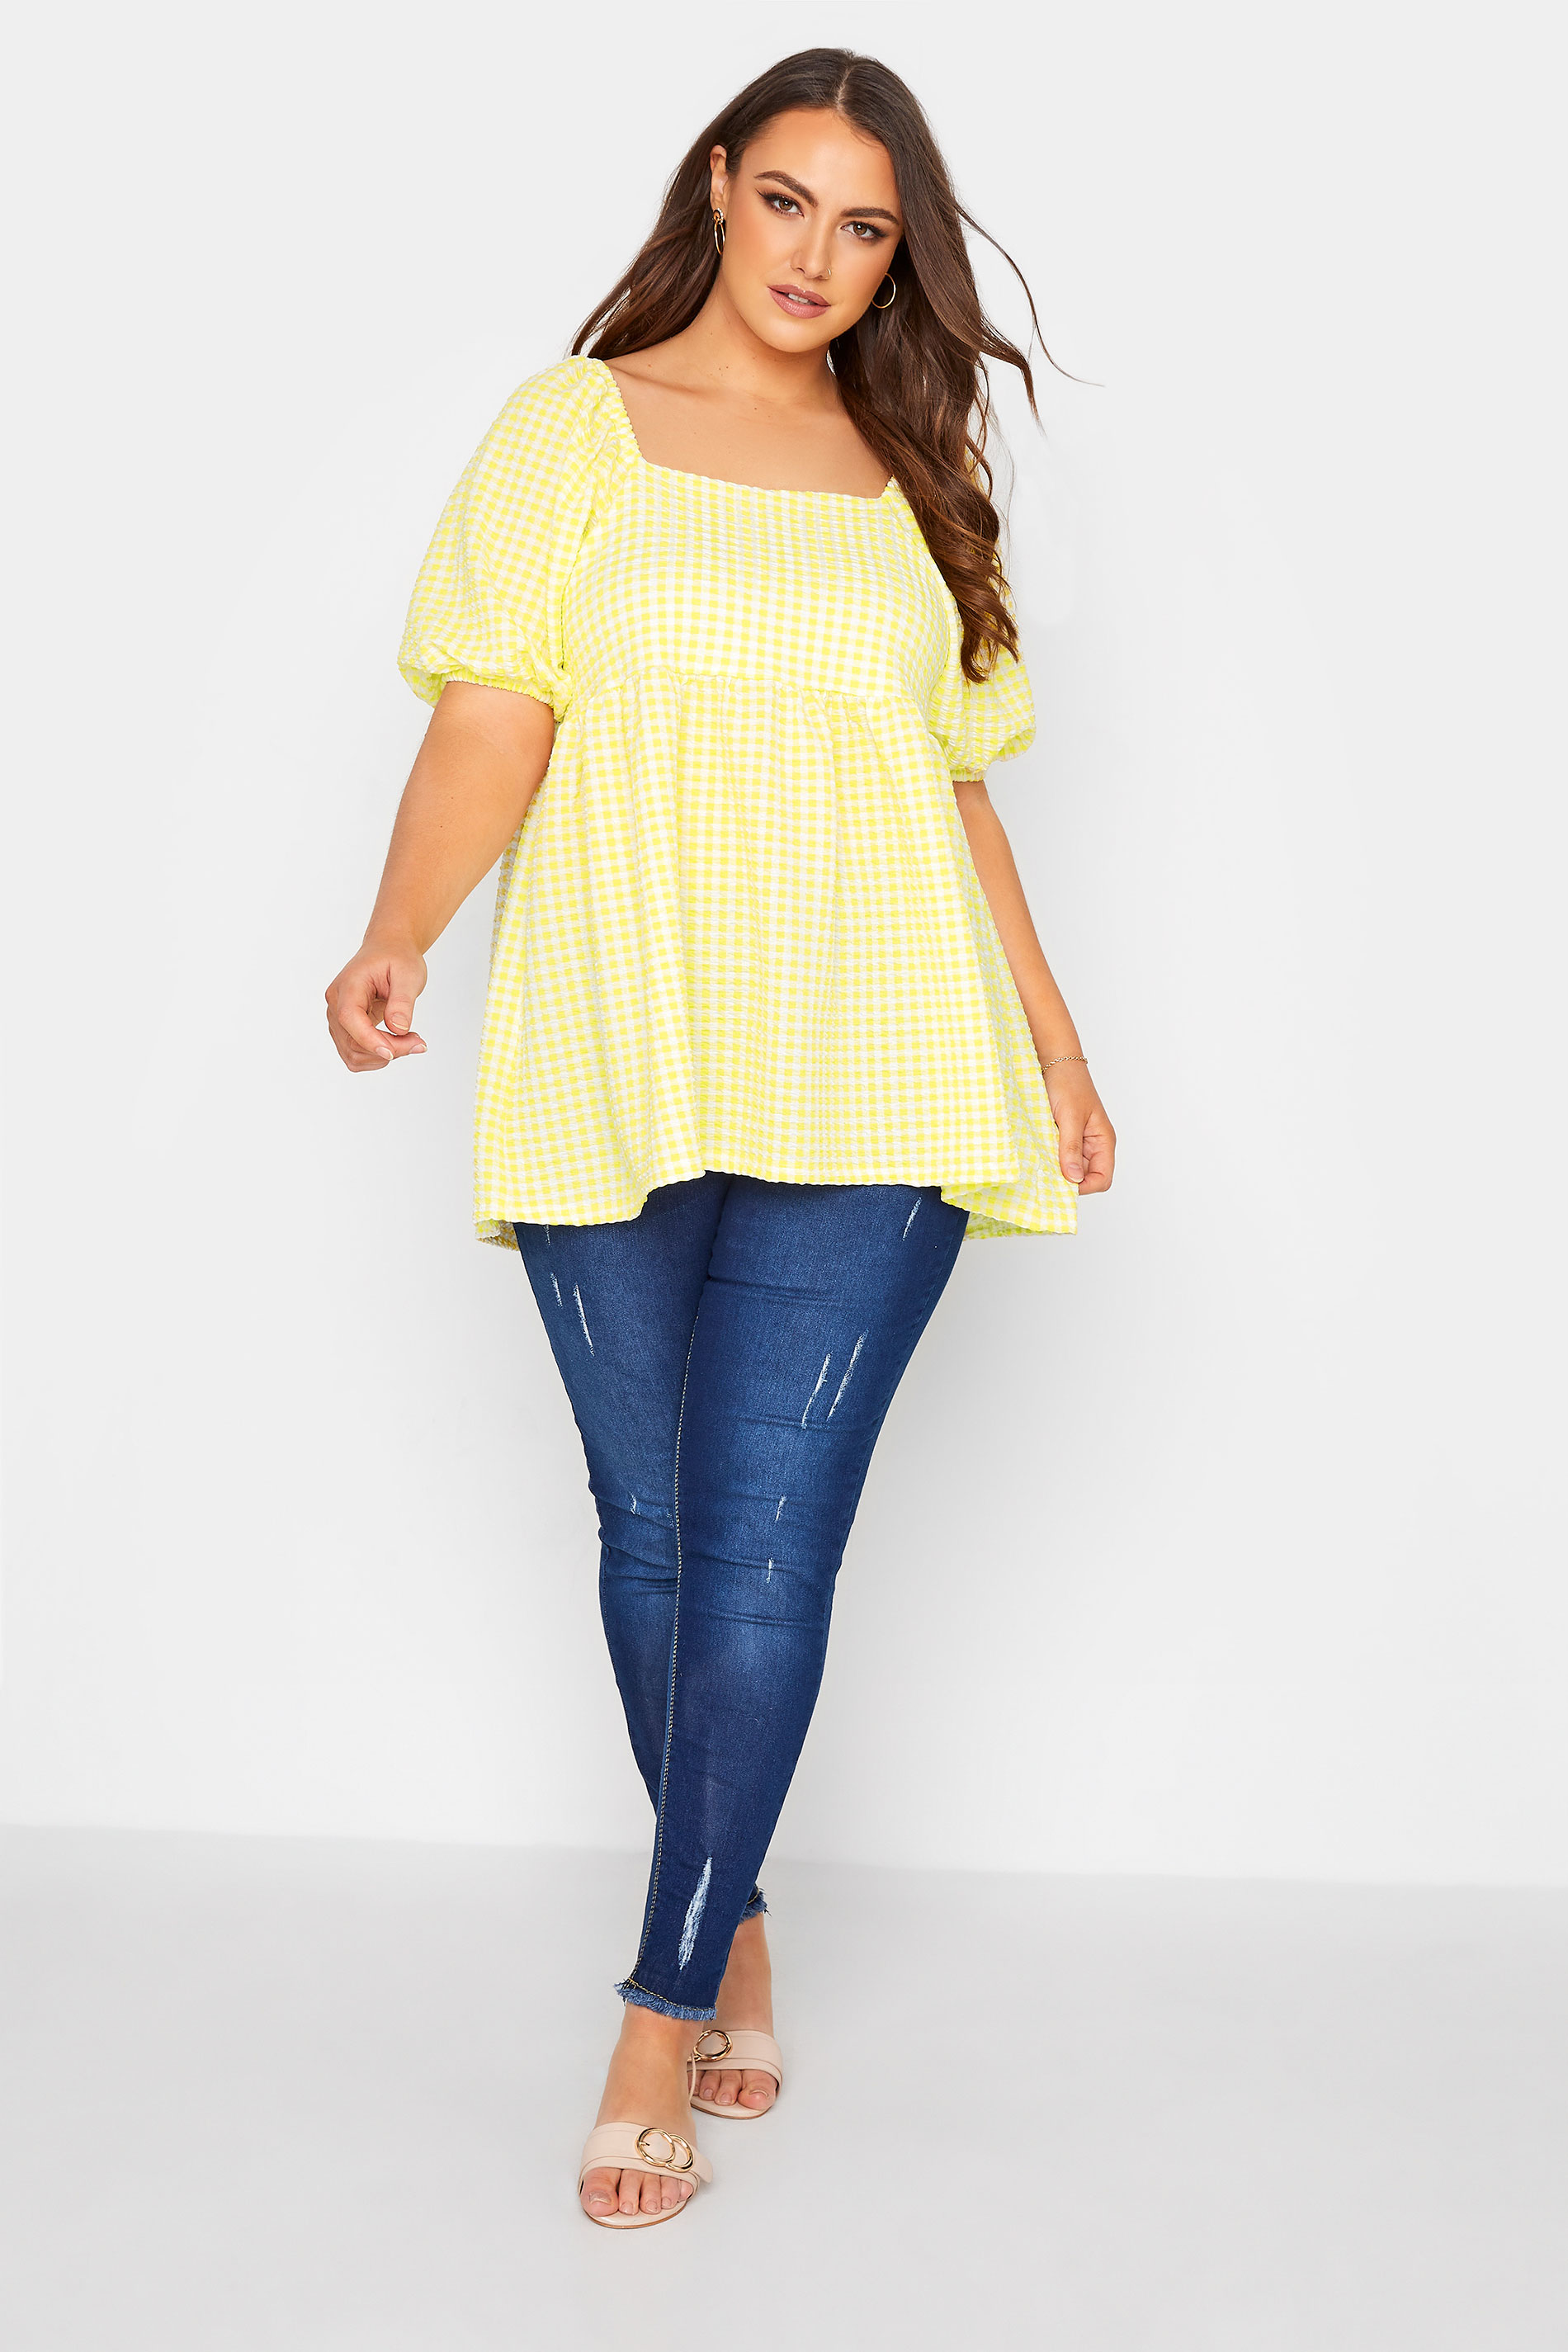 Grande taille  Tops Grande taille  Tops Casual | LIMITED COLLECTION - Top Jaune à Carreaux Manches Bouffantes - YI88818